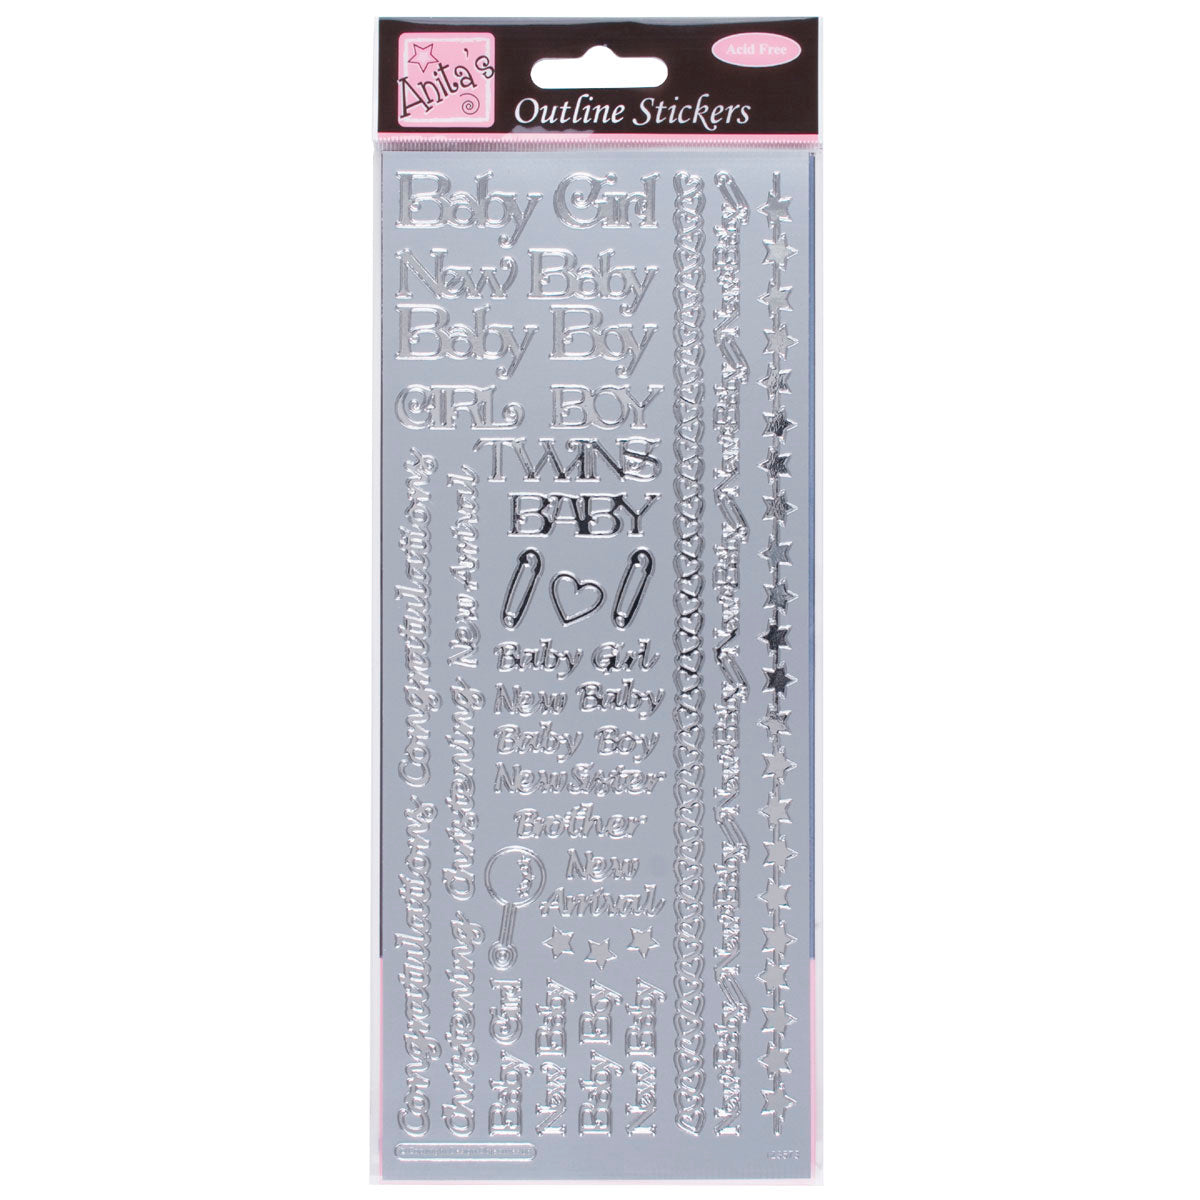 Anitas peel off outline stickers - New Baby silver